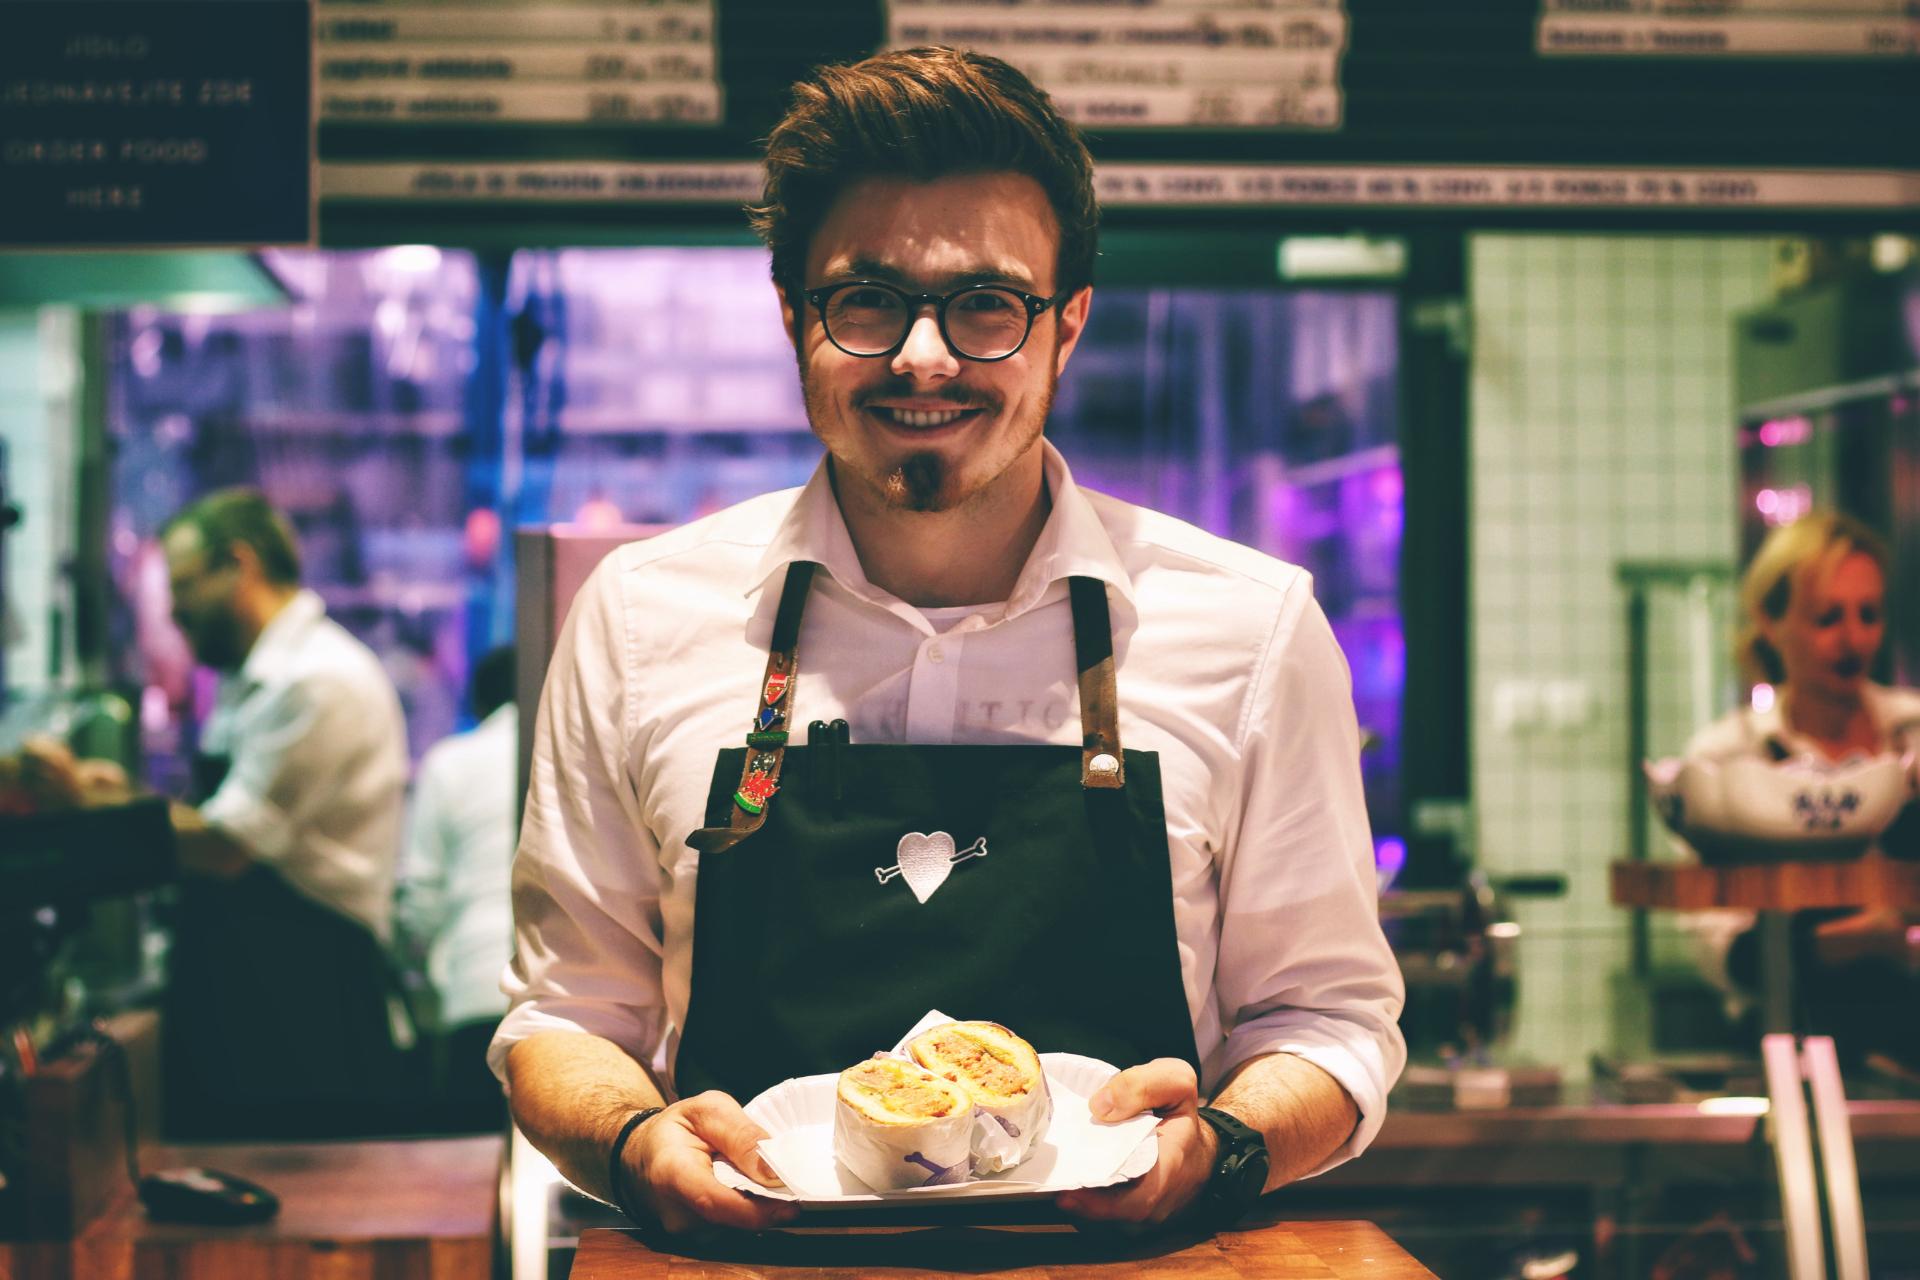 Waiter smiling and about serve food to customers